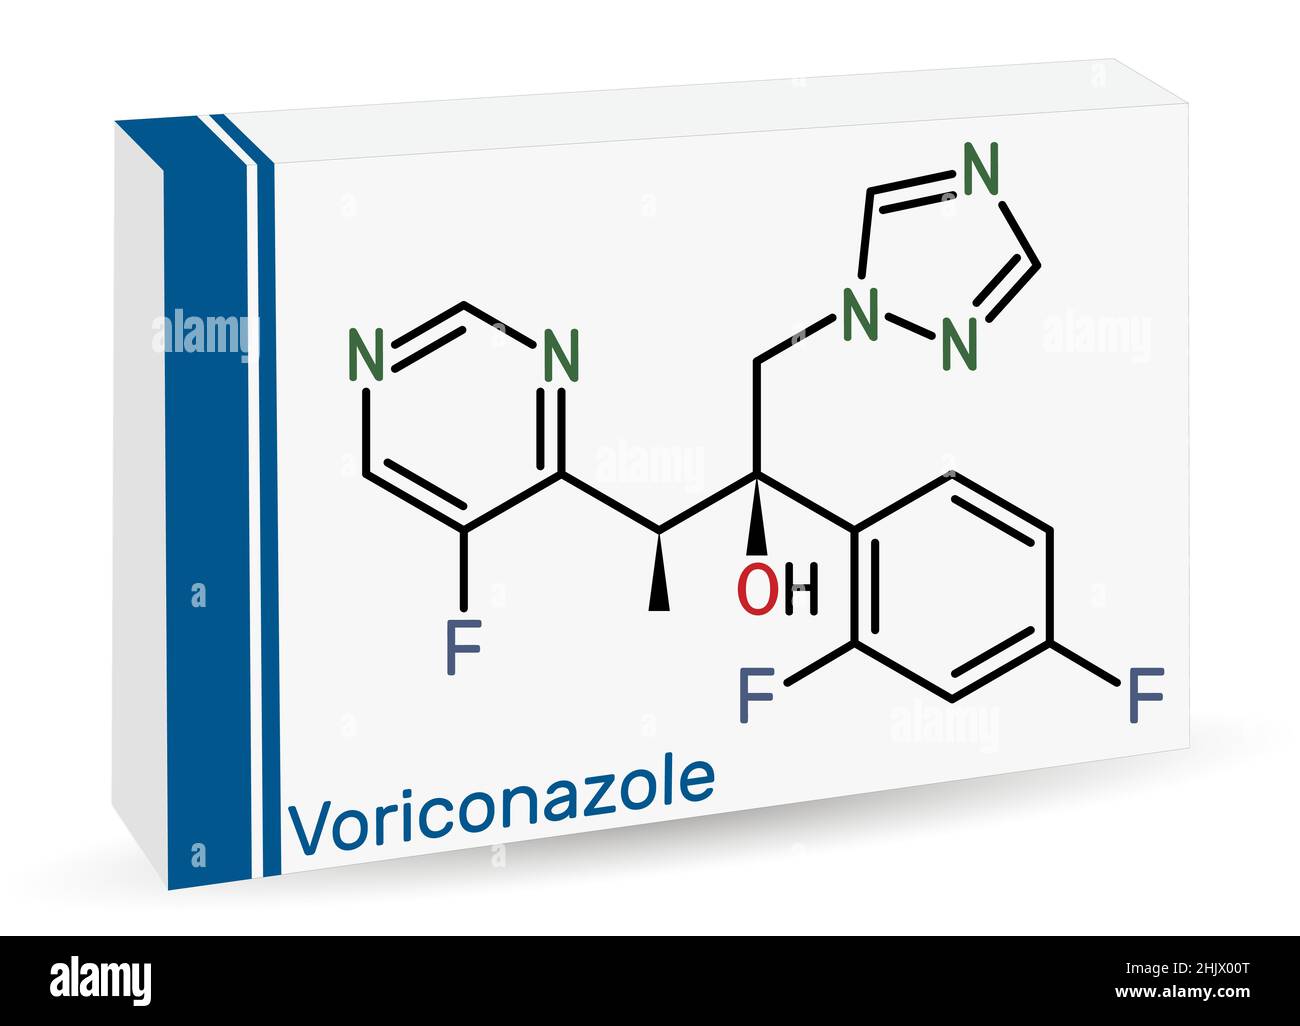 Voriconazole, molecule. It is is  triazole antifungal medication used to treat fungal infection. Skeletal chemical formula. Paper packaging for drugs. Stock Vector